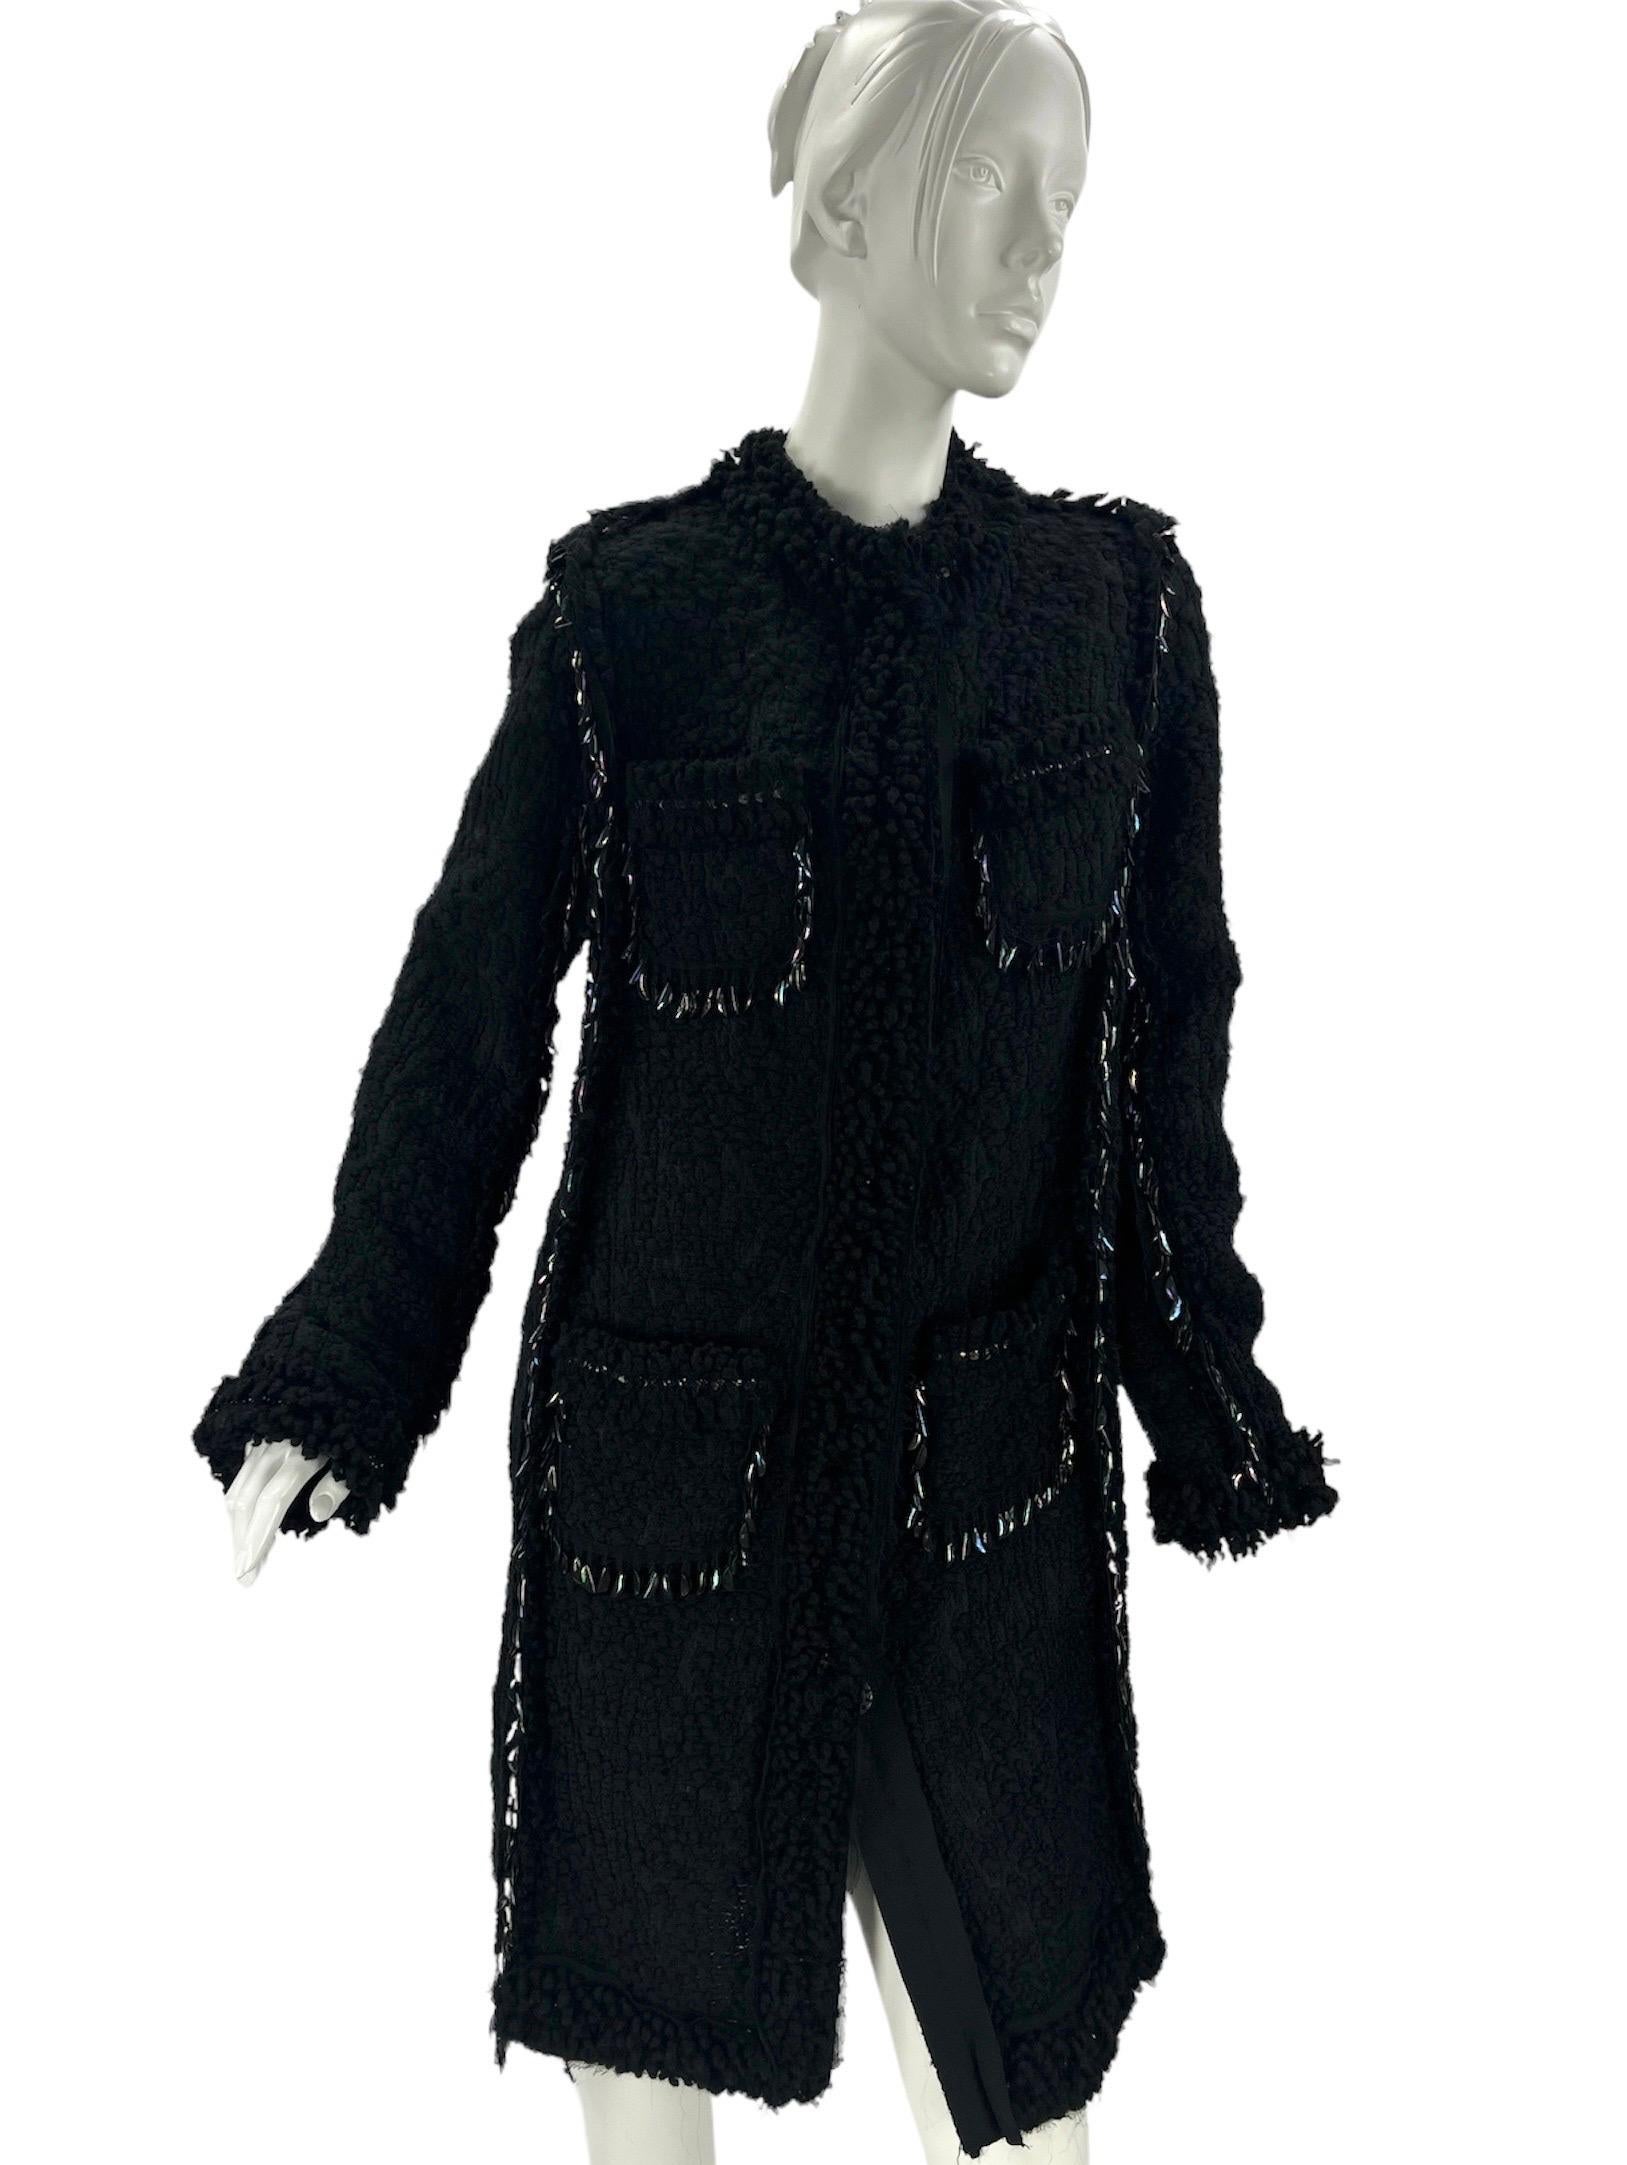 F/W 2010 Vintage Lanvin black embellished boucle tweed coat 40 - 8 NWT In New Condition For Sale In Montgomery, TX